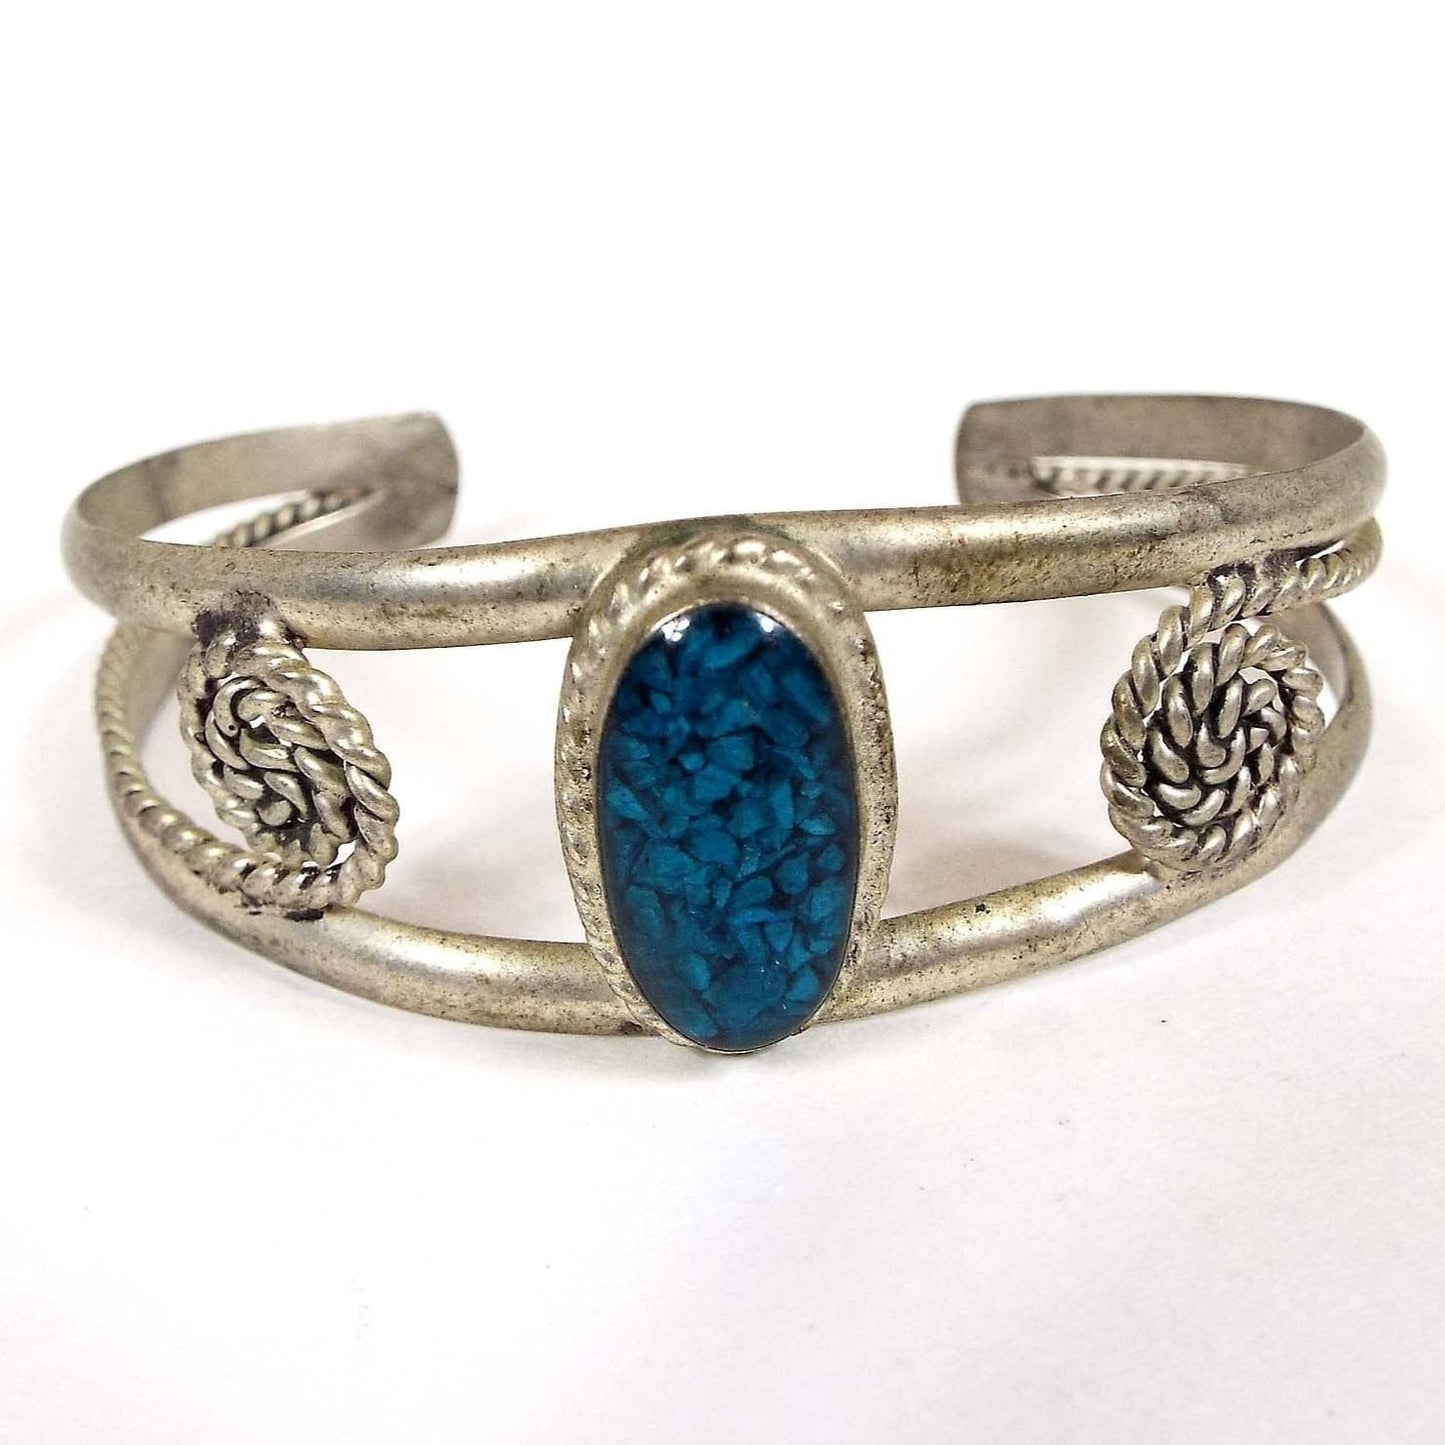 Front view of the retro vintage Mexican alpaca cuff bracelet. Metal is silver tone in color. The top middle has an oval bezel with blue resin and small blue gemstone chips. There is a band of metal at the top and bottom of the oval that curves around to the back to form the cuff. It has tapered ends and from the ends is a smaller twisted wire that comes back towards the front and then spirals curling inwards.